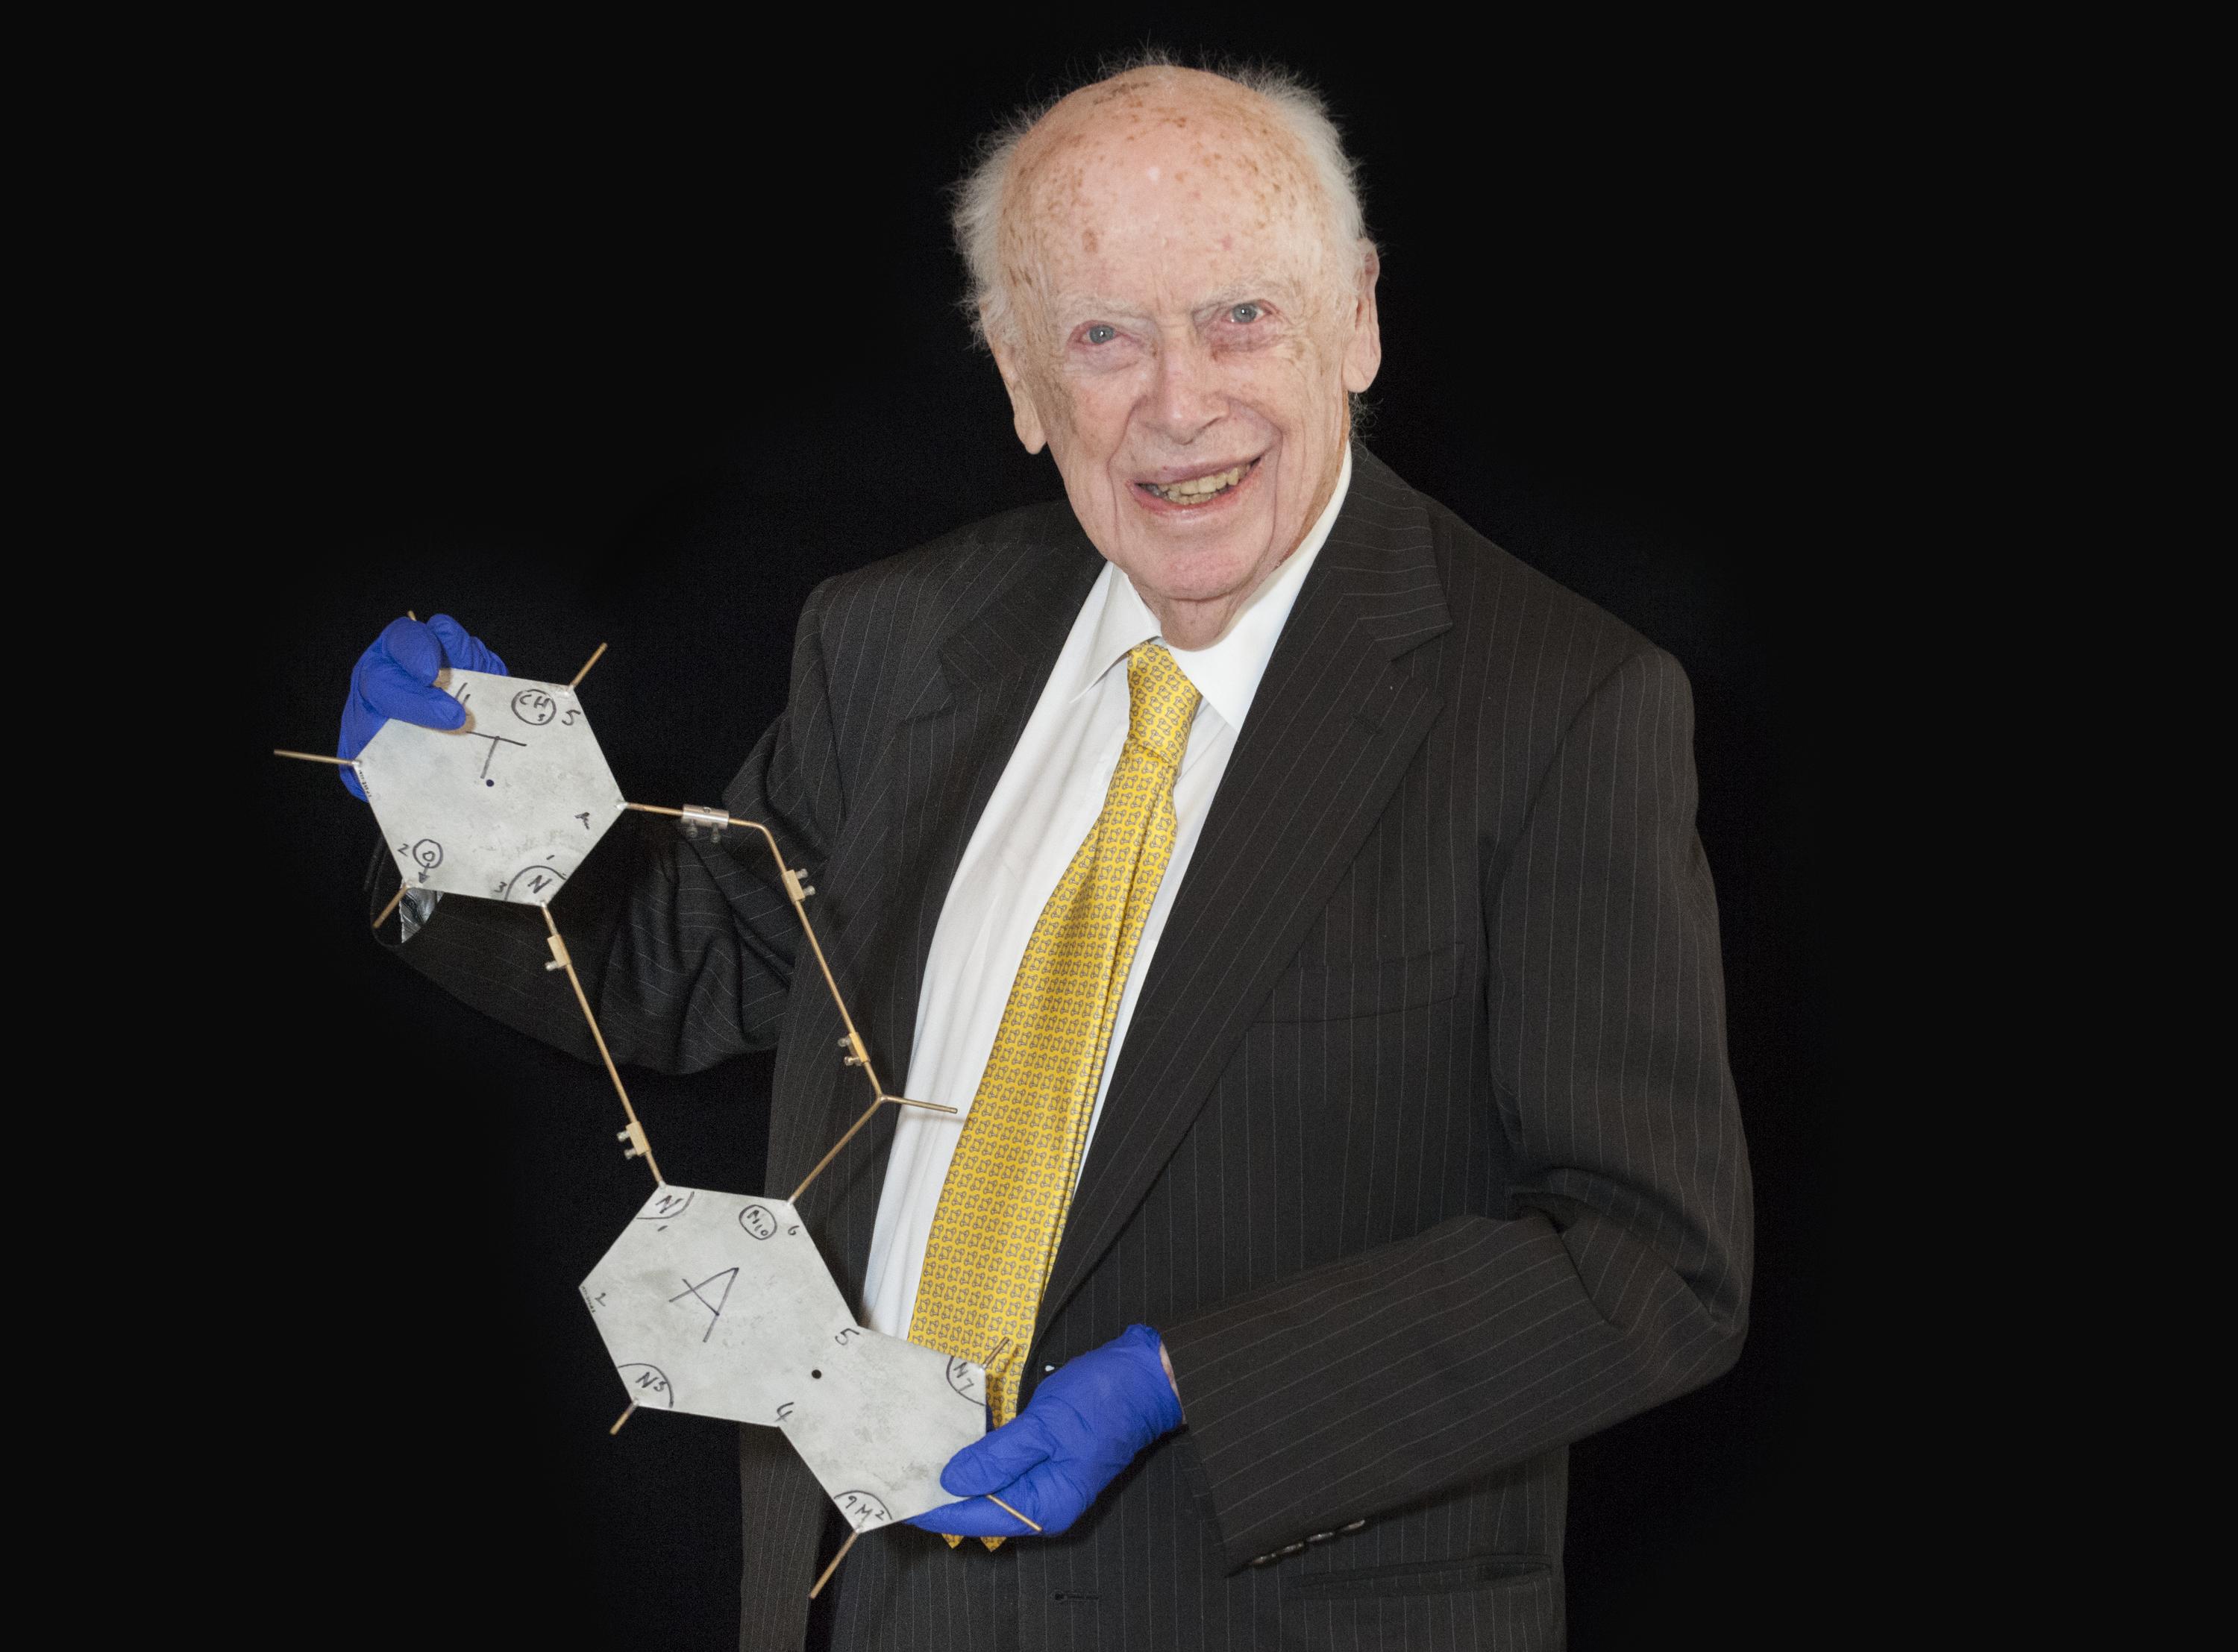 Portrait of James Watson, American molecular biologist, geneticist and zoologist, best known as one of the co-discoverers of the structure of DNA in 1953 with Francis Crick and Rosalind Franklin. Pictured with 1977-0300 metal plate representing the pyrimidines cytosine and thymine, and 18 metal plates representing the purines